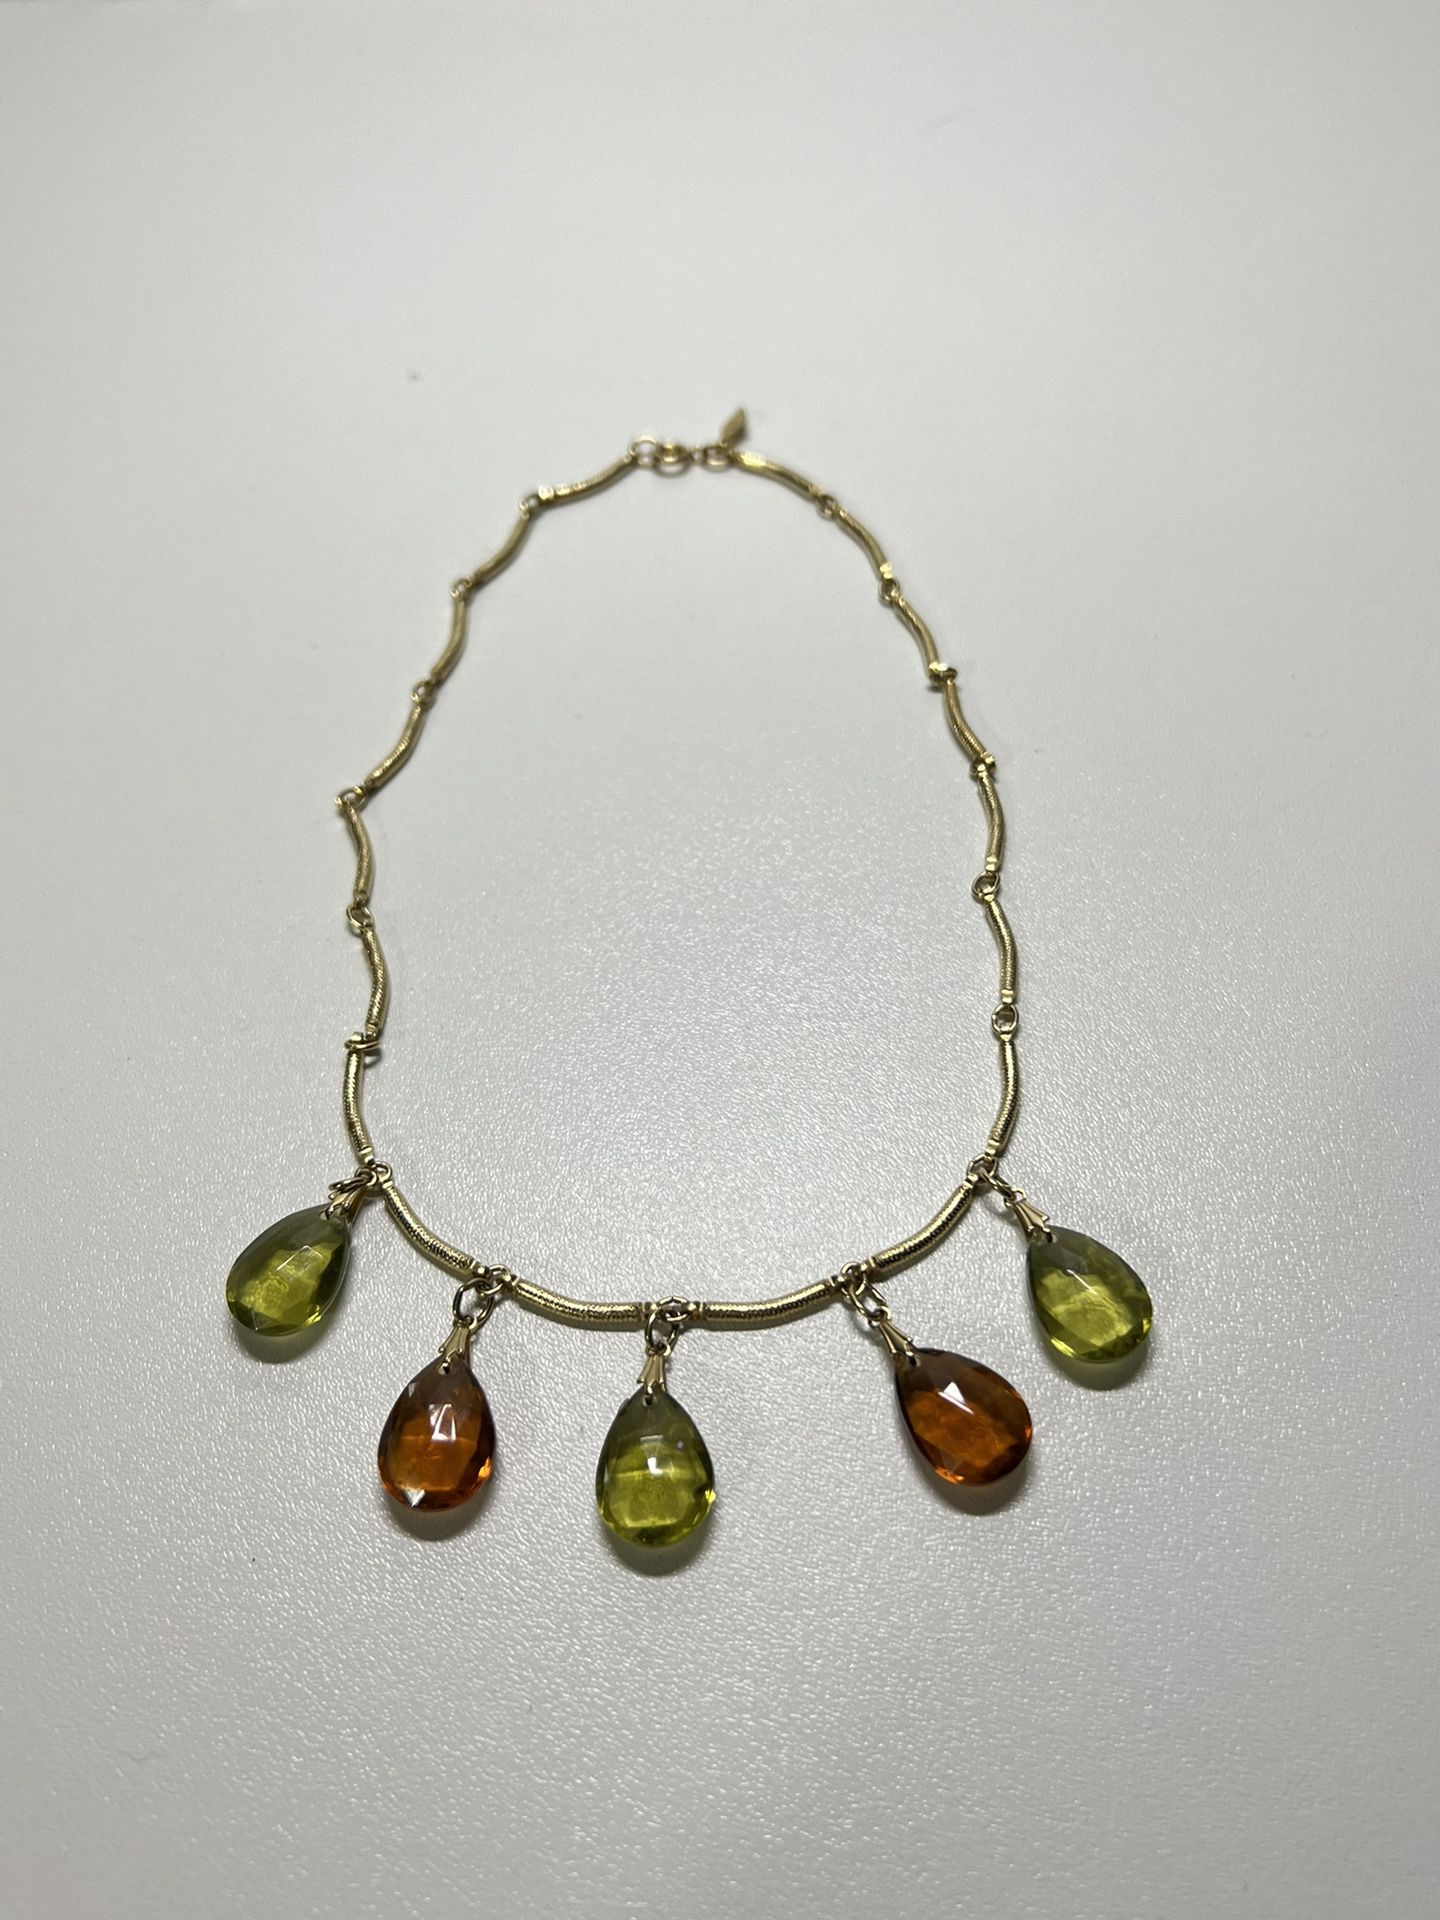 Vintage Sarah Coventry Necklace "Ember Tears" Amber Green Lucite Gold Tone 1975